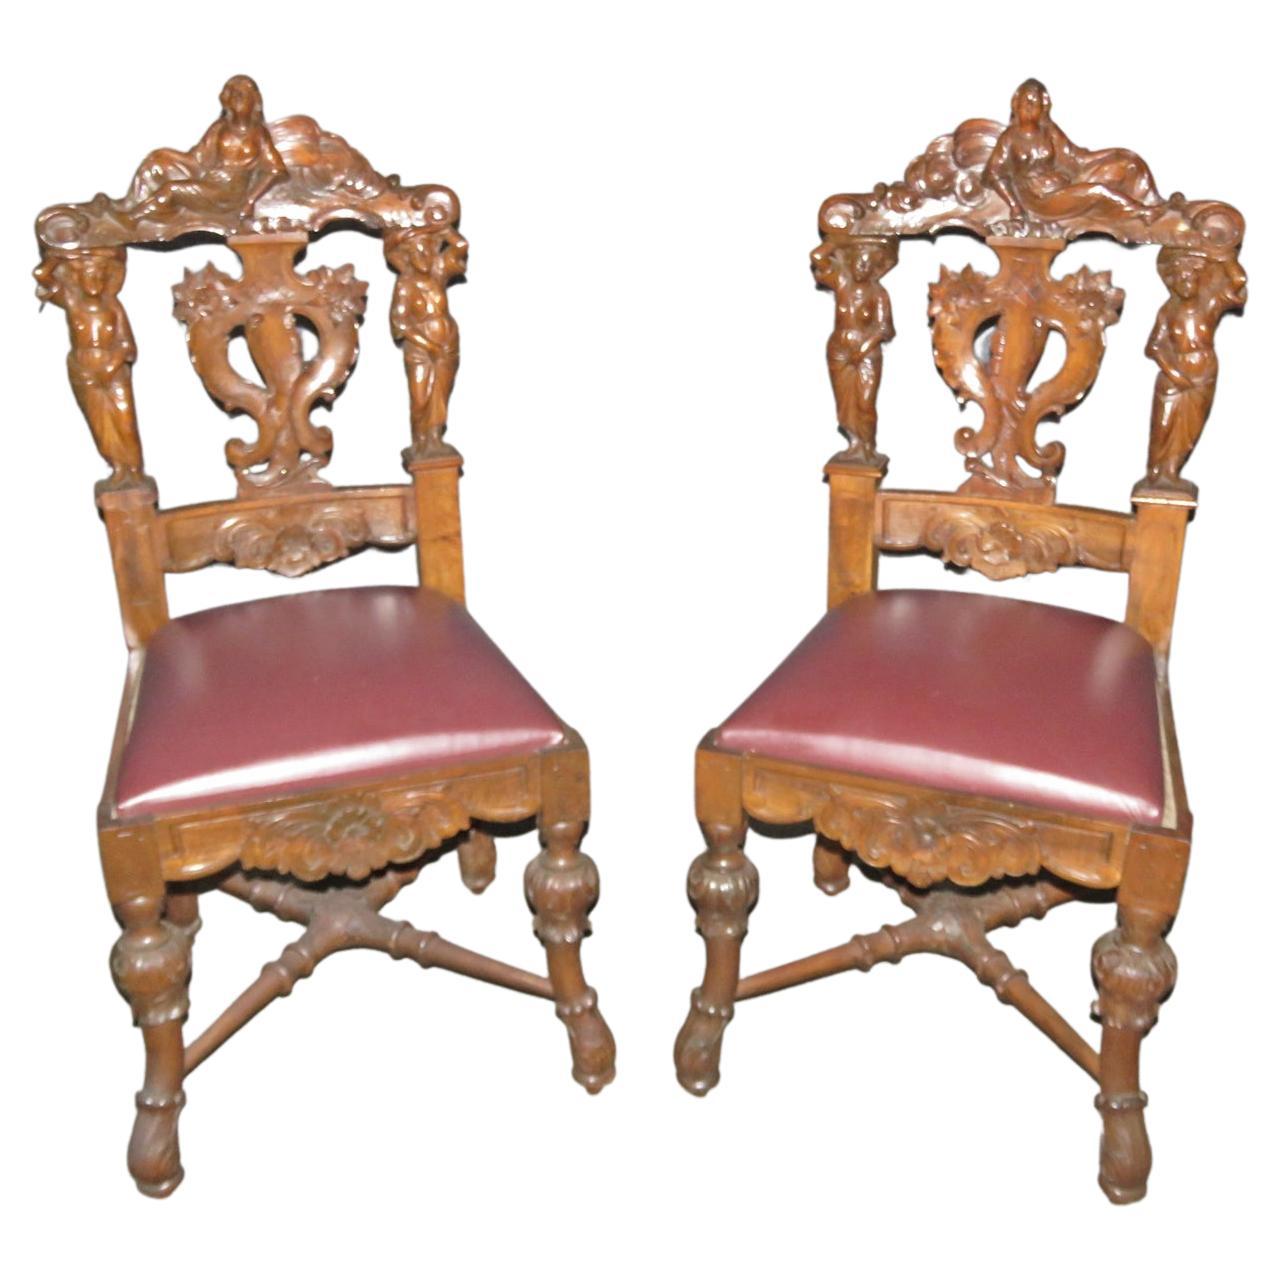 Pair of Figural Carved Walnut R.J. Horner Style Renaissance Chairs, circa 1880 For Sale